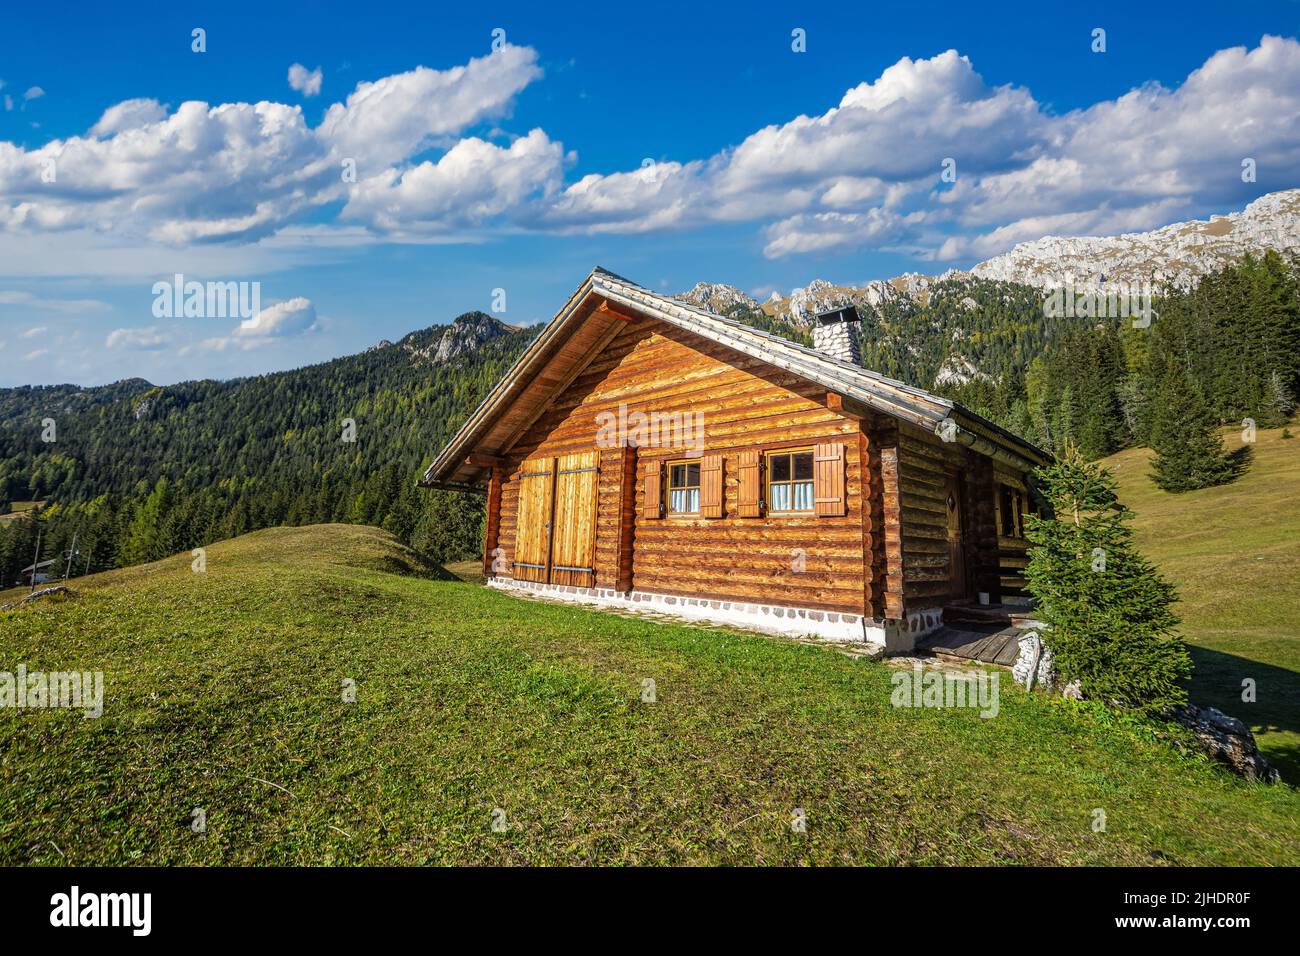 Dolomites, Italy - Traditional wooden chalet in the Italian Dolomites on a sunny summer day with blue sky and clouds Stock Photo